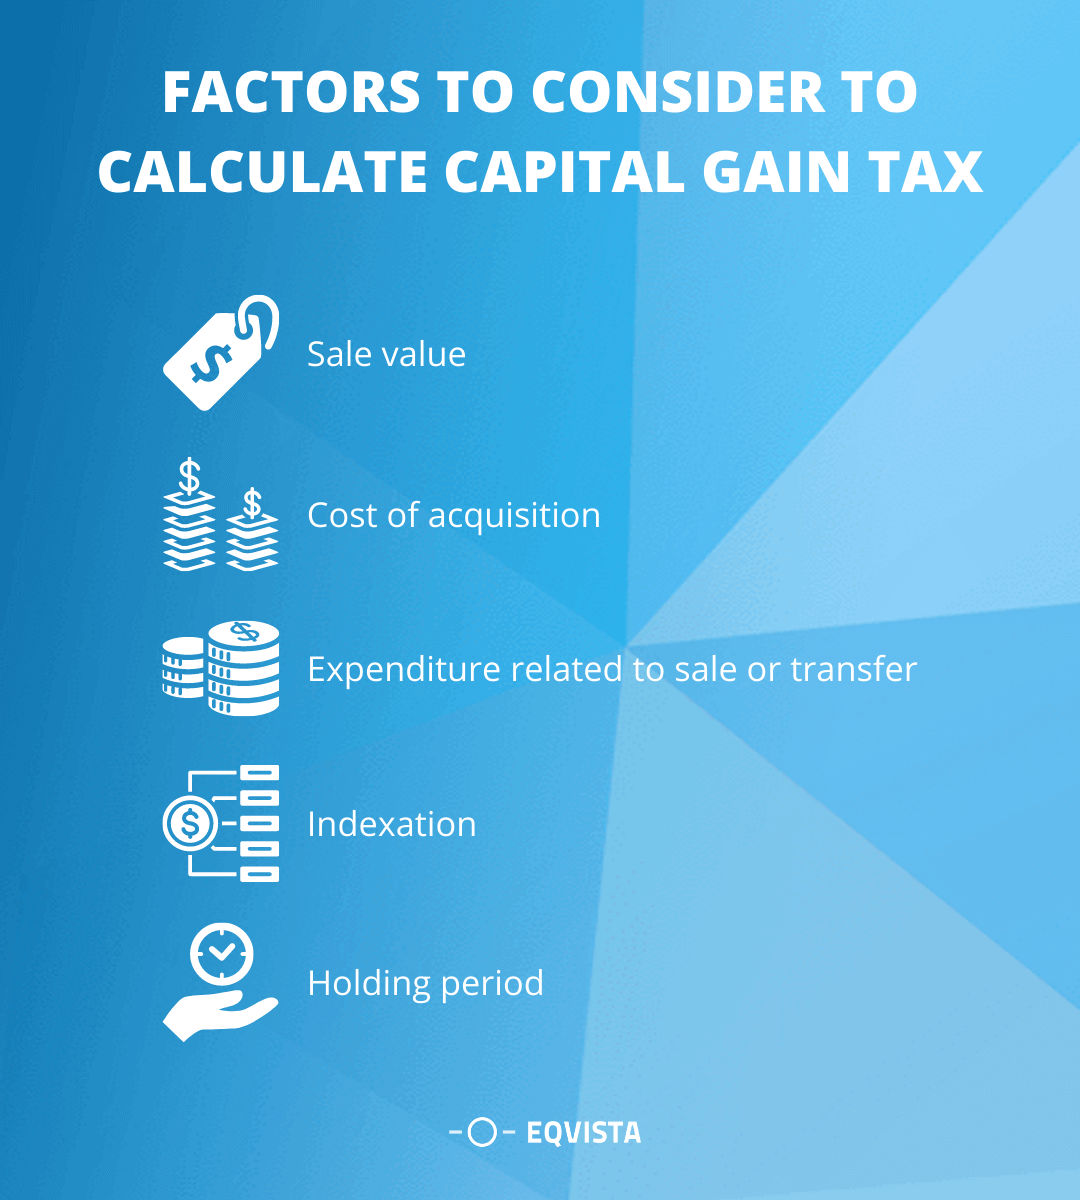   Factors to consider to calculate capital gain tax